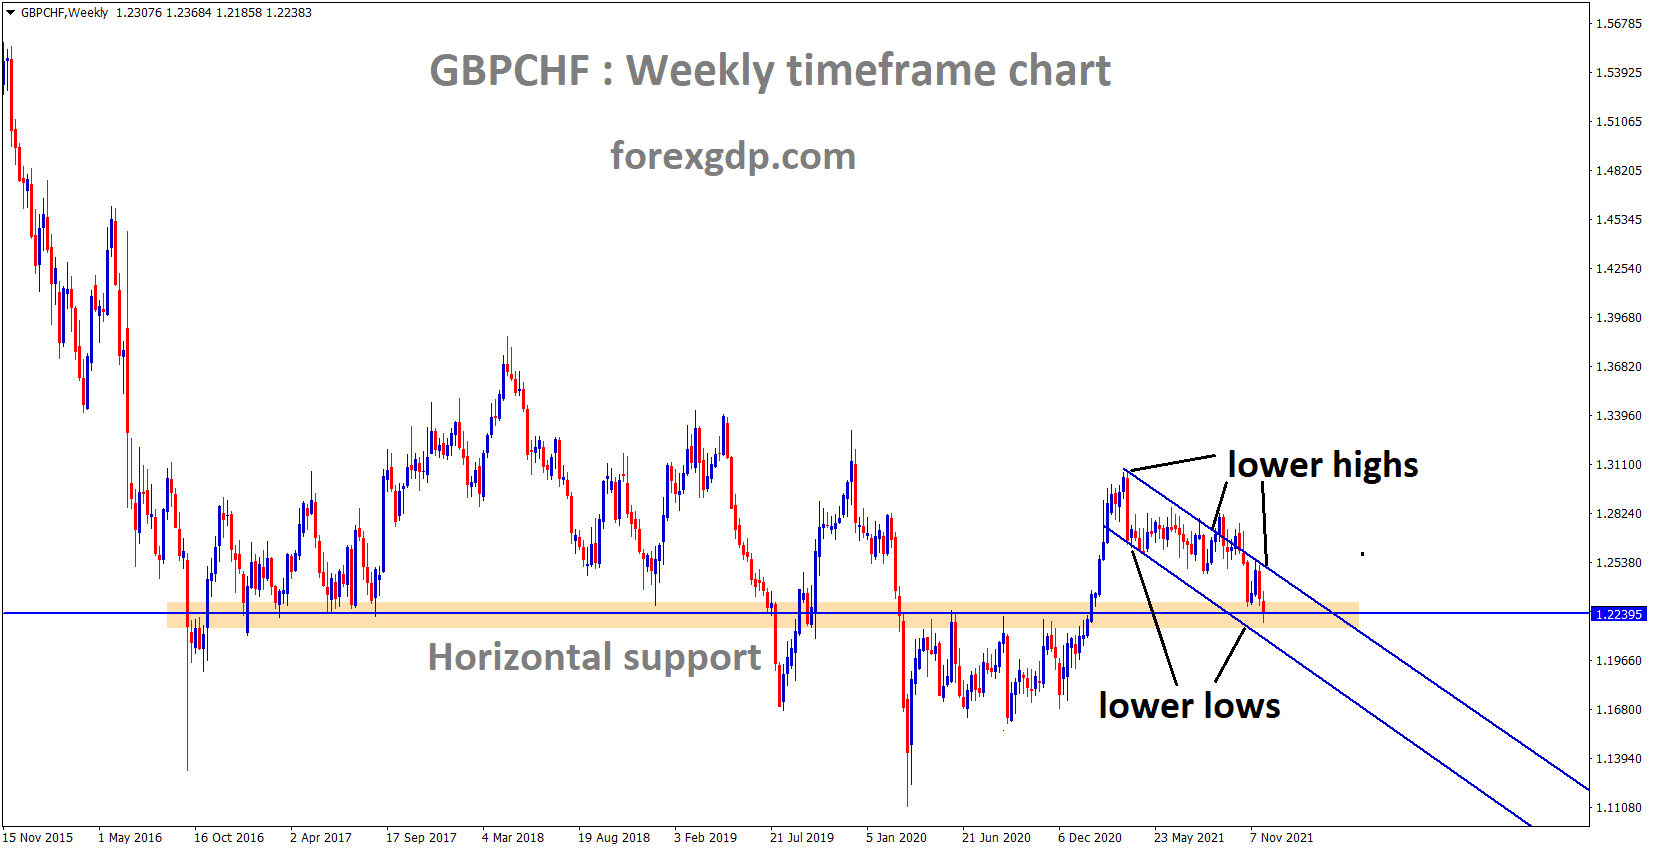 GBPCHF is moving in the Descending channel and the market reached the Horizontal weekly support zone area.